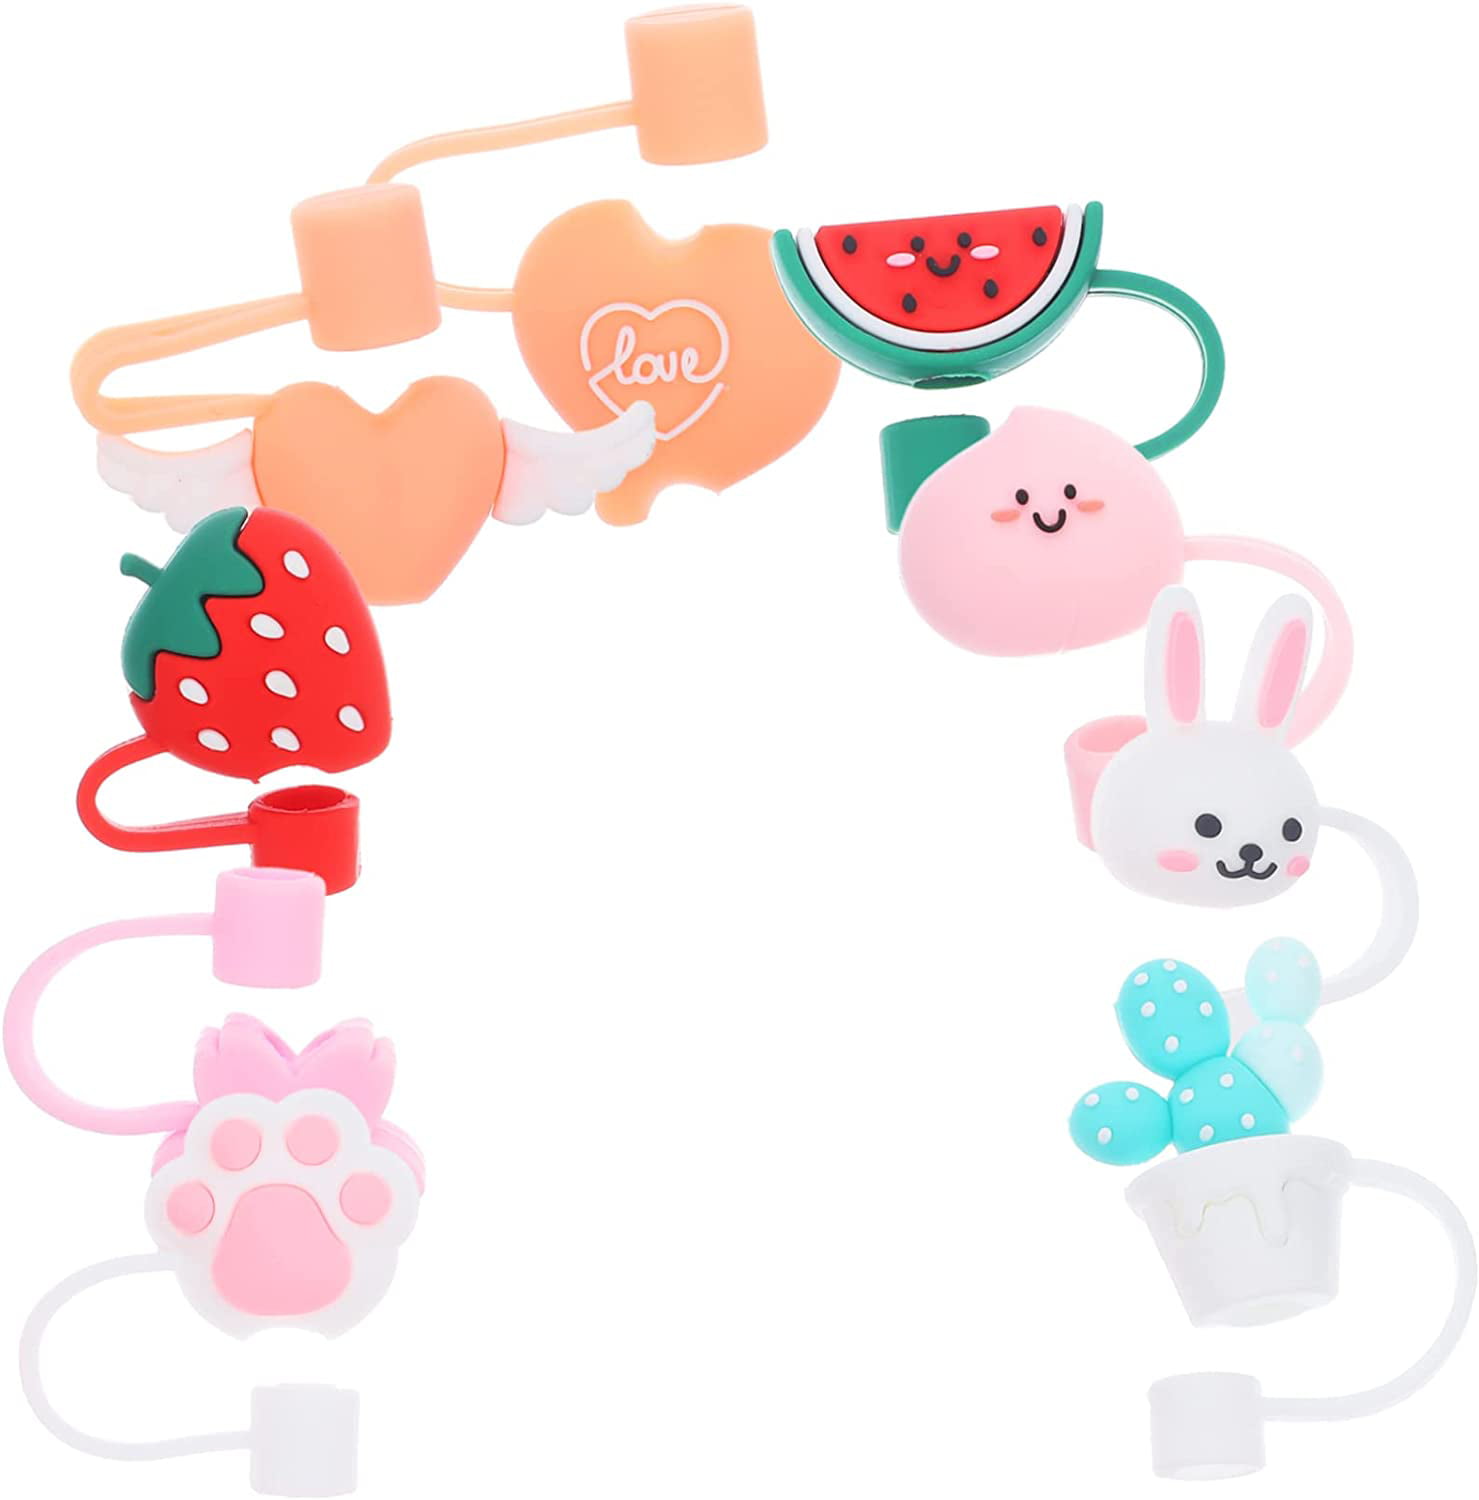 Kawaii Drinking Straw Topper, The Linea Home